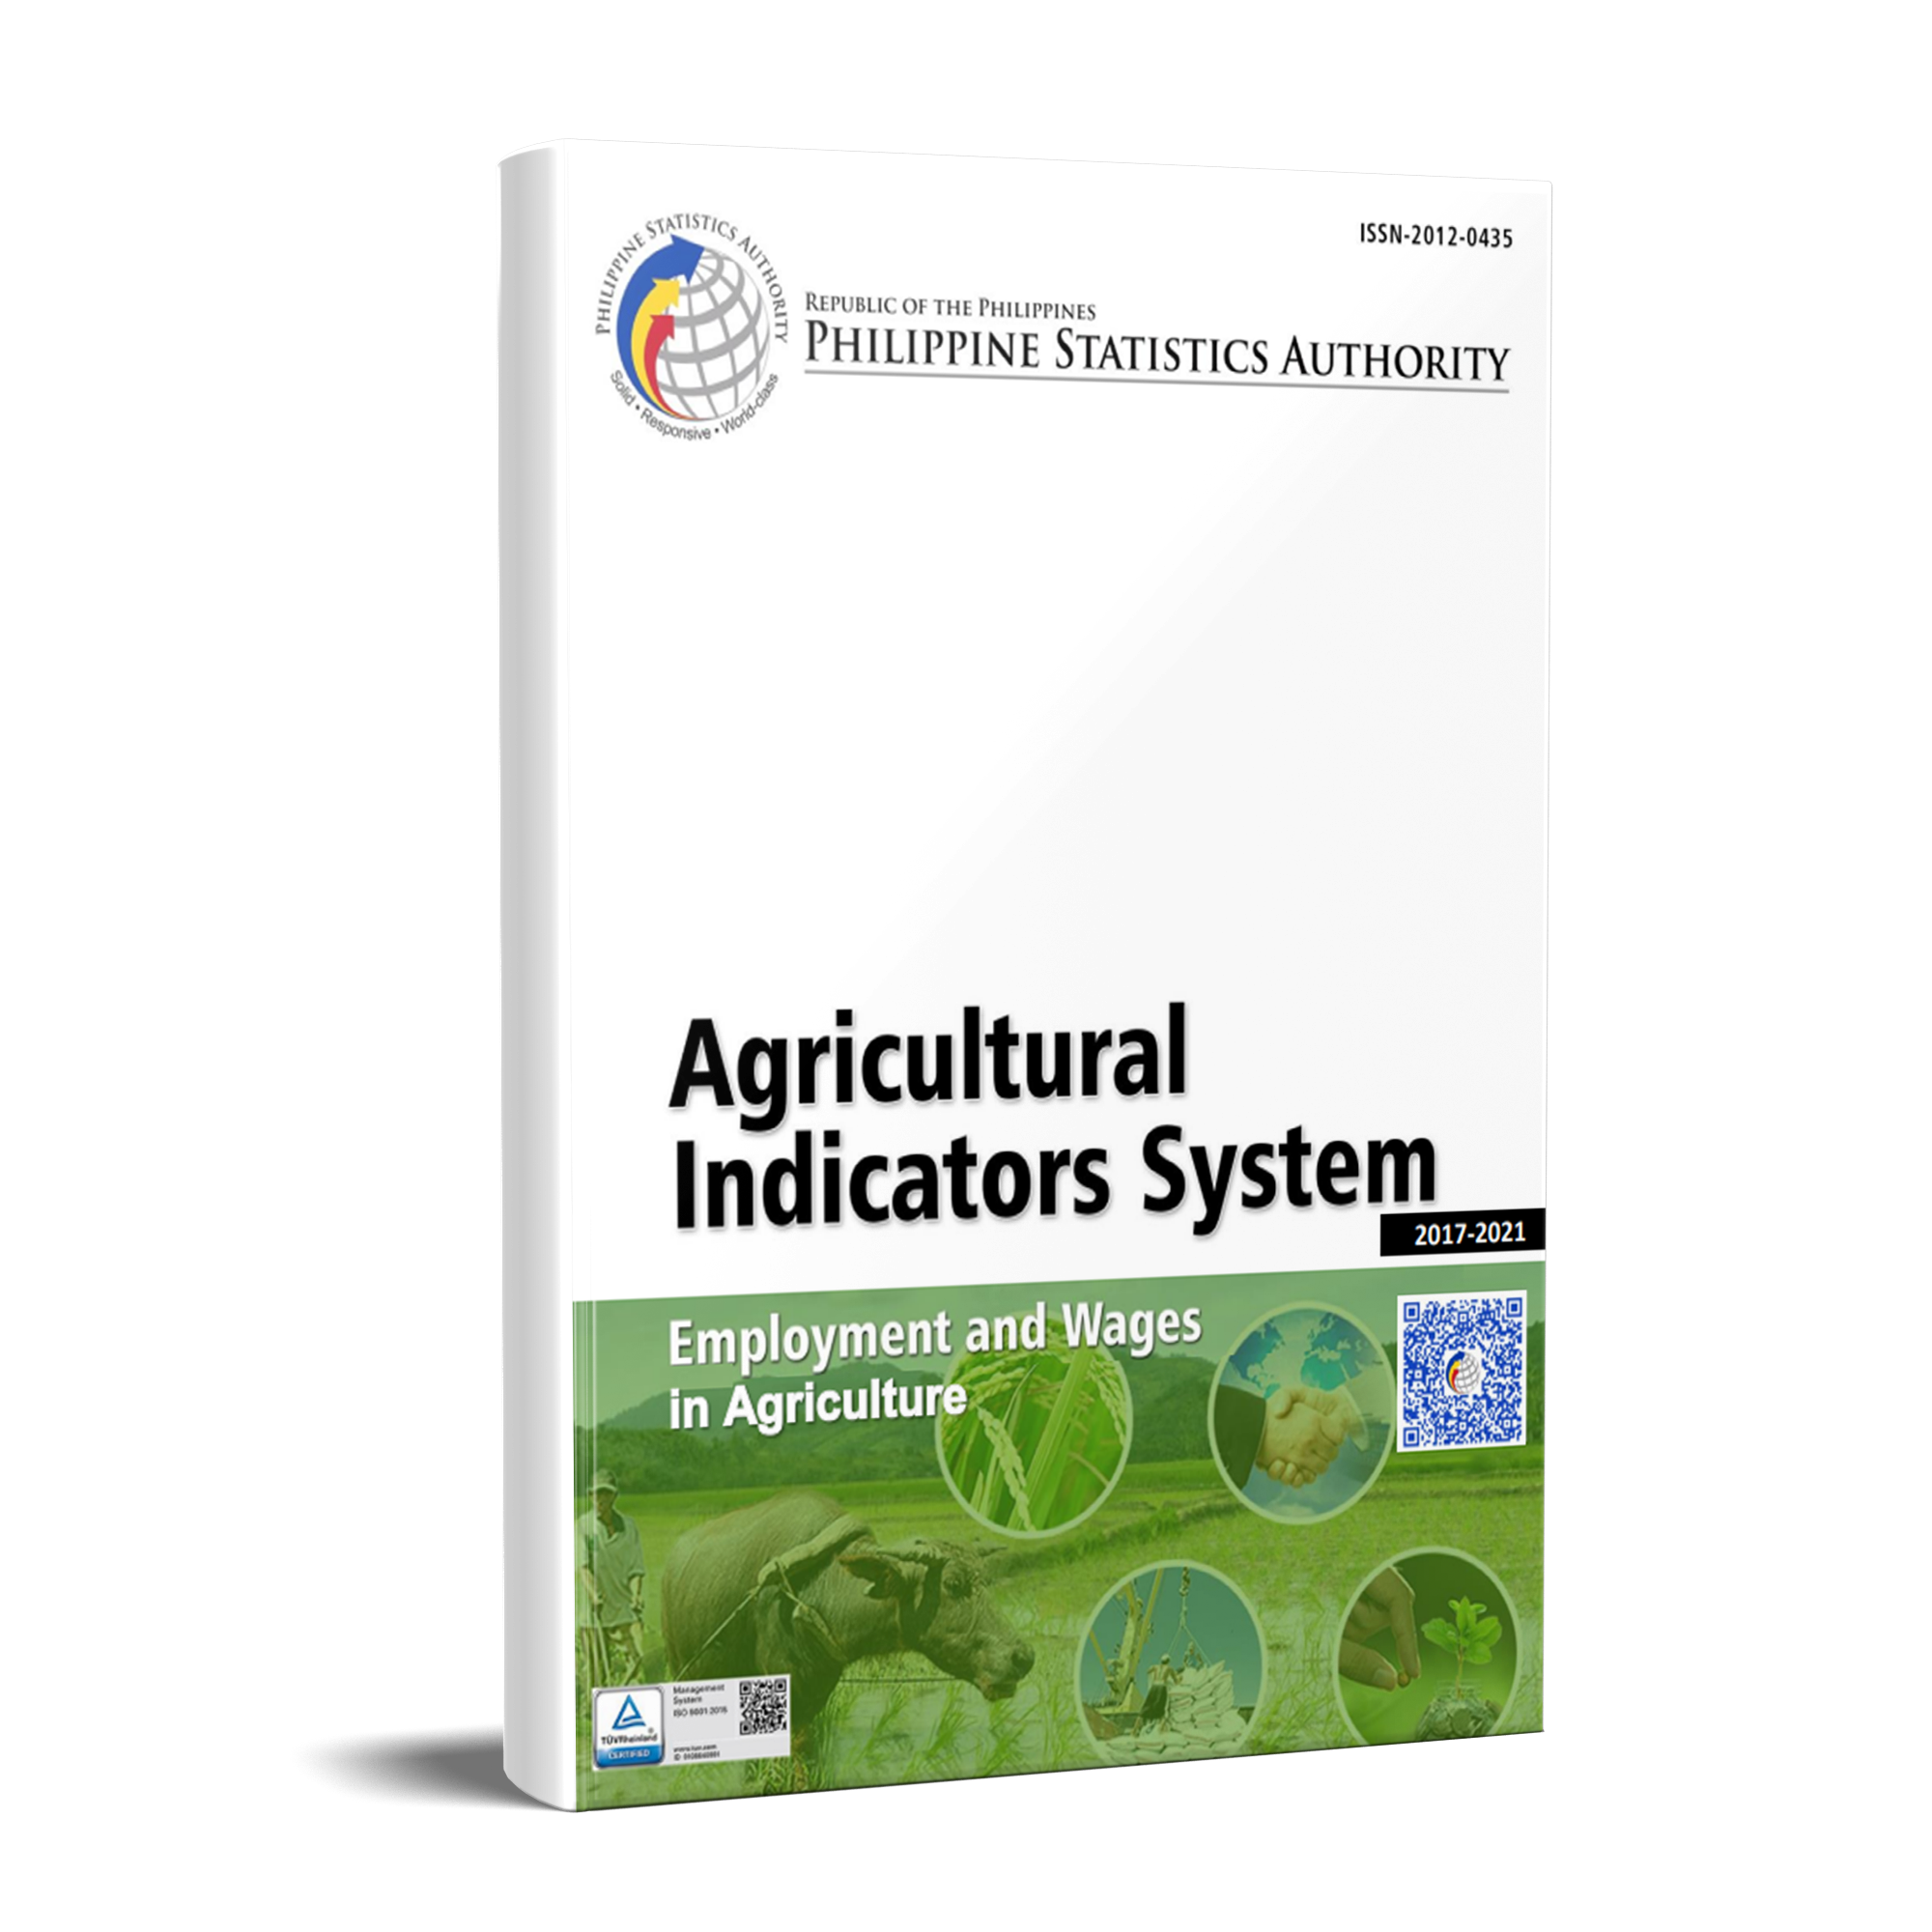 Agricultural Indicators System: Employment and Wages in Agriculture